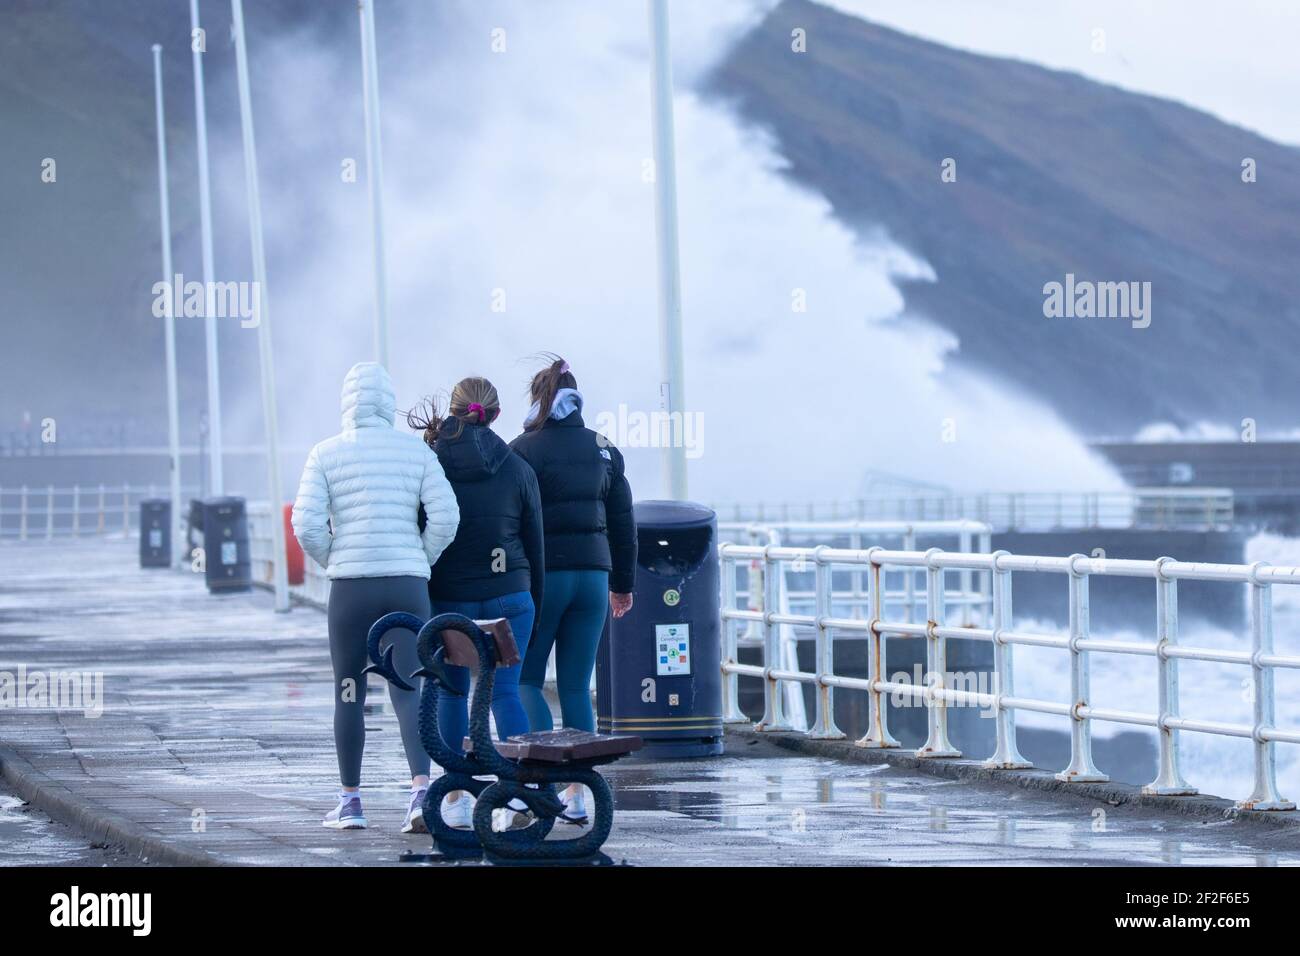 Aberystwyth, Ceredigion, Wales, UK. 12th March 2021 UK Weather: Gusty westerly Winds continue this morning as it combines with high tide, creating huge waves against the sea defences in Aberystwyth. © Ian Jones/Alamy Live News Stock Photo